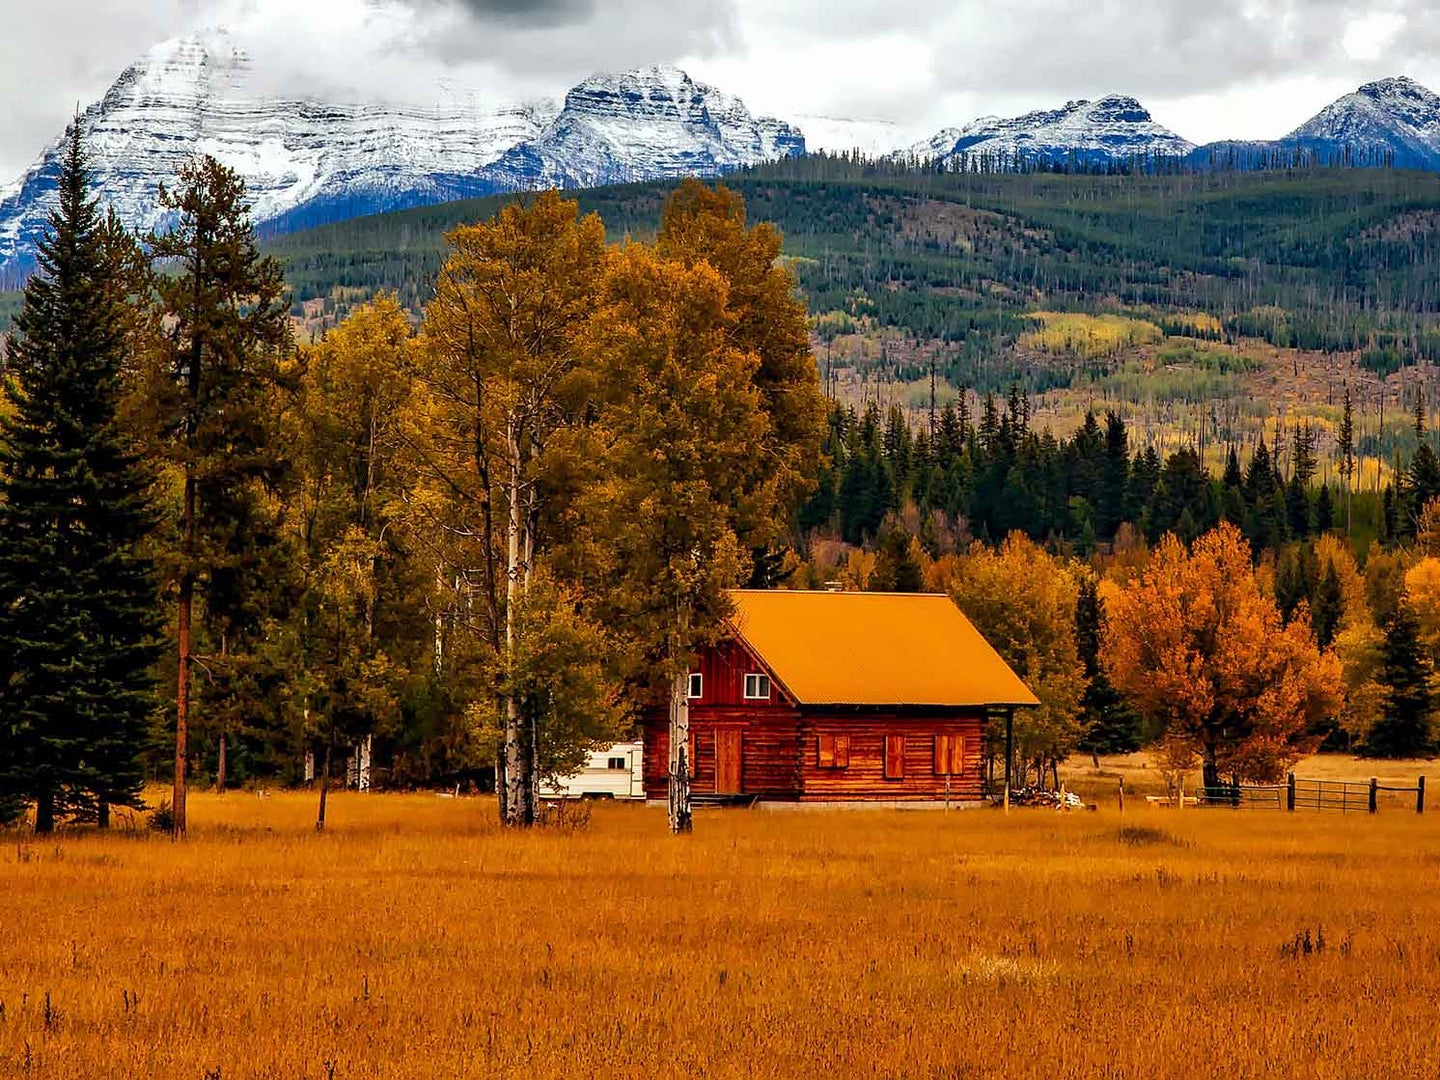 Cabin surrounded by autumnal foliage